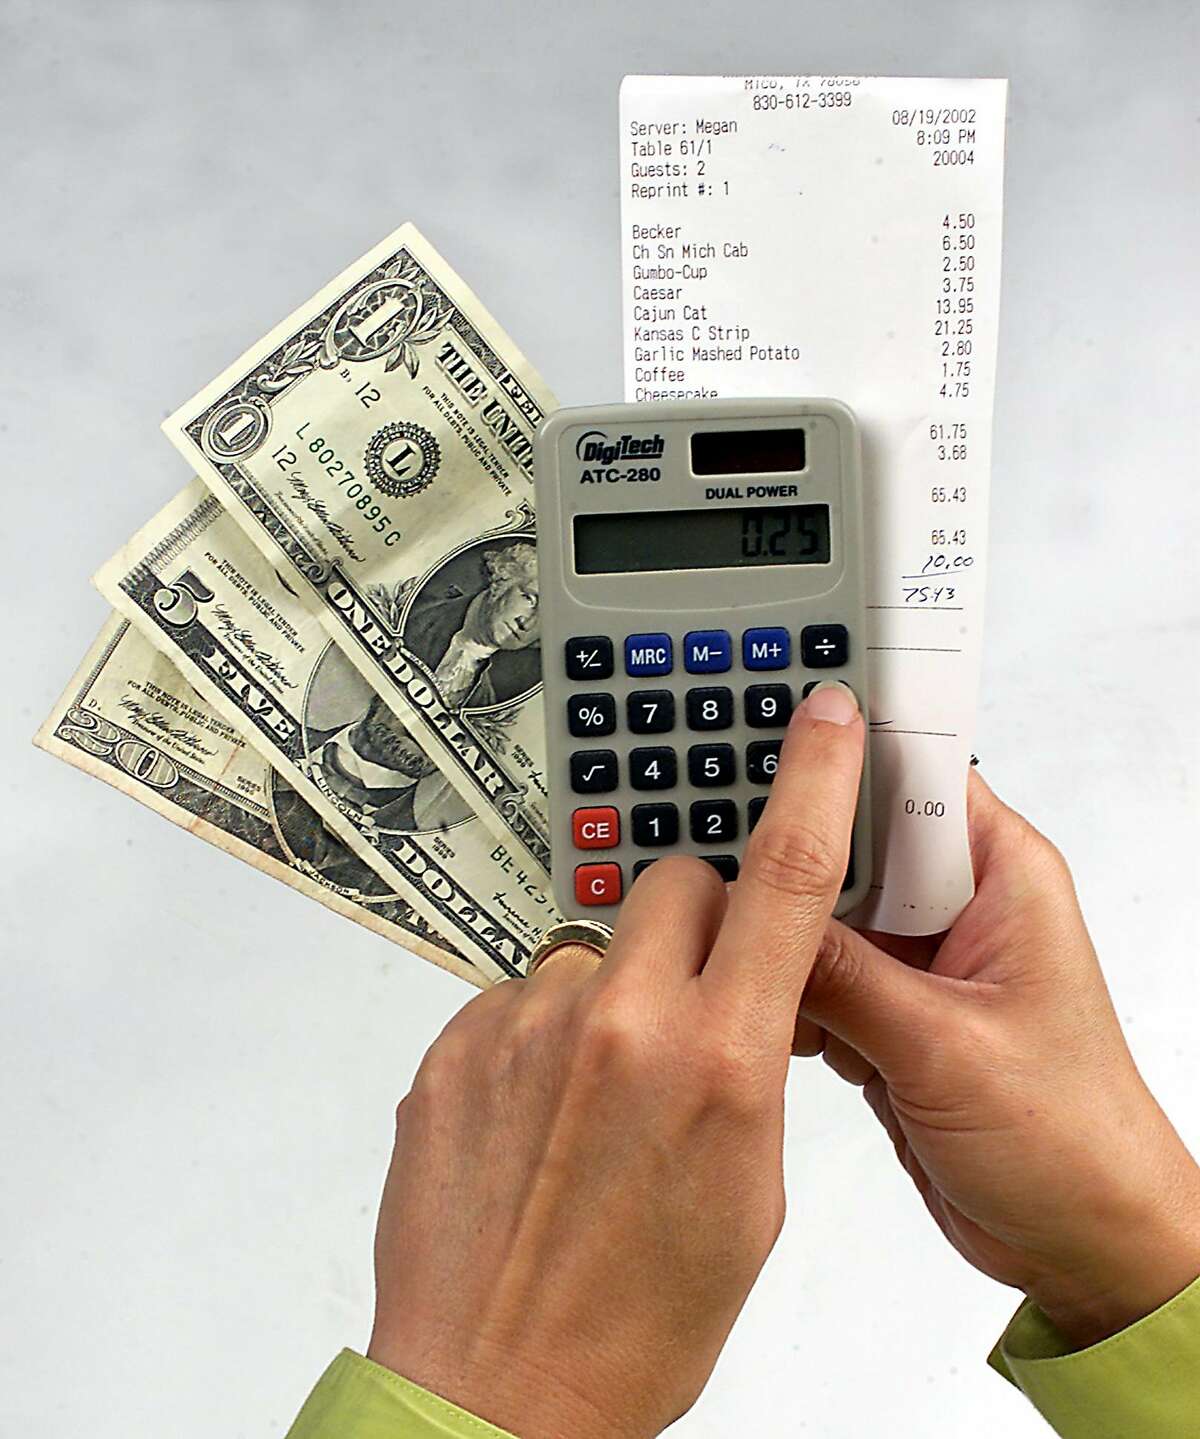 Hands using a calculator to figure a tip while holding money and a receipt. PHOTO BY JUANITO GARZA / STAFF